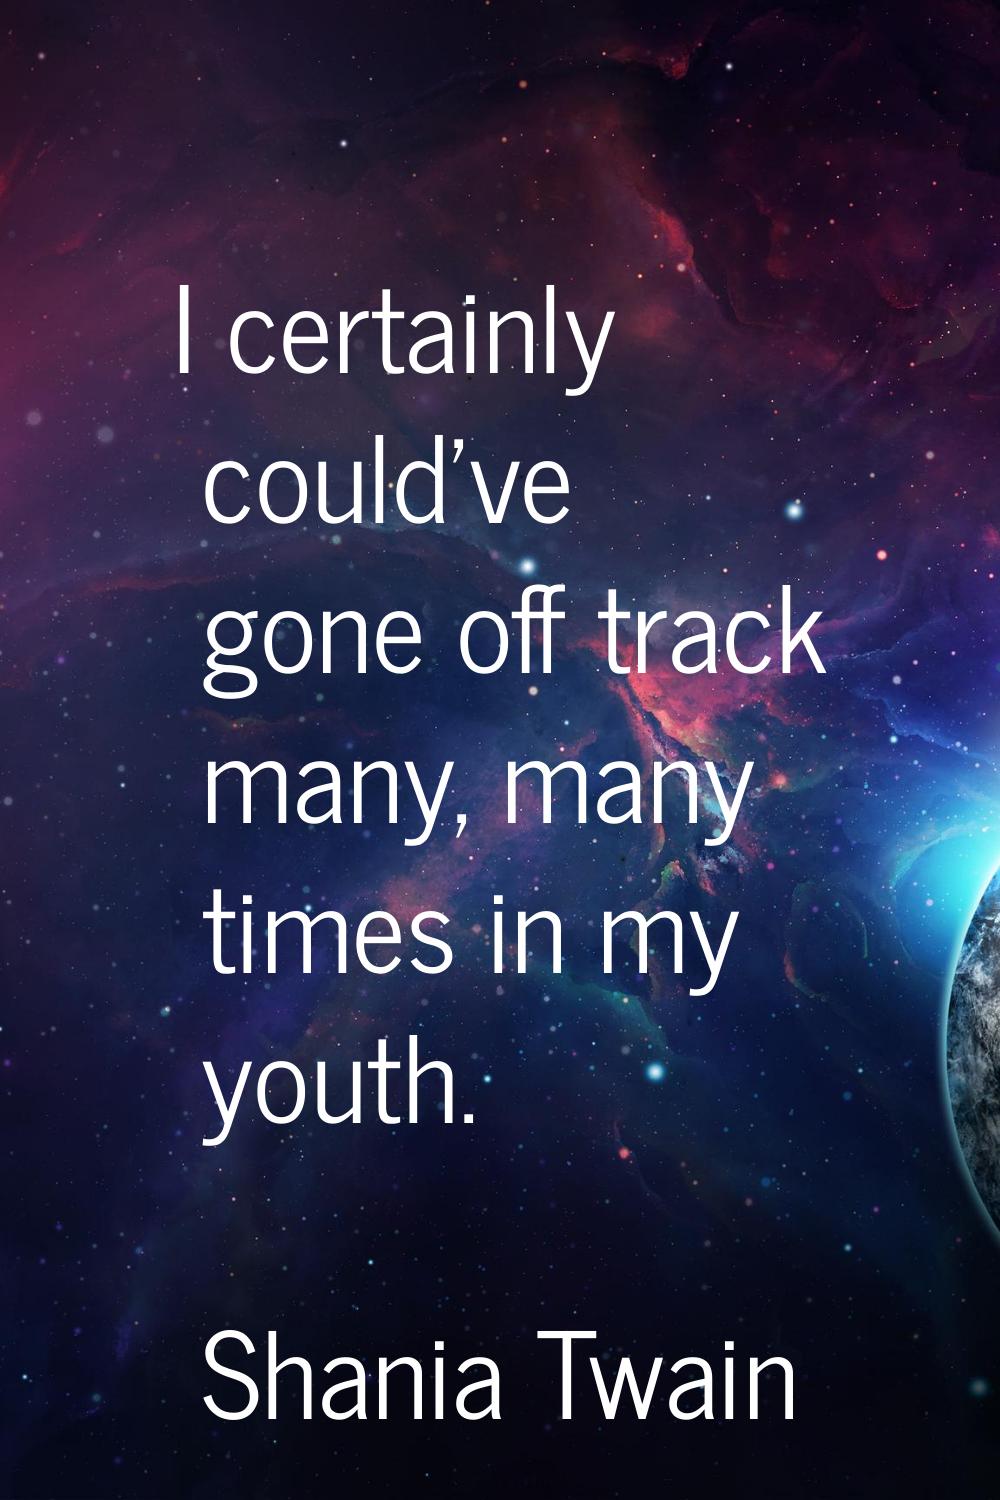 I certainly could've gone off track many, many times in my youth.